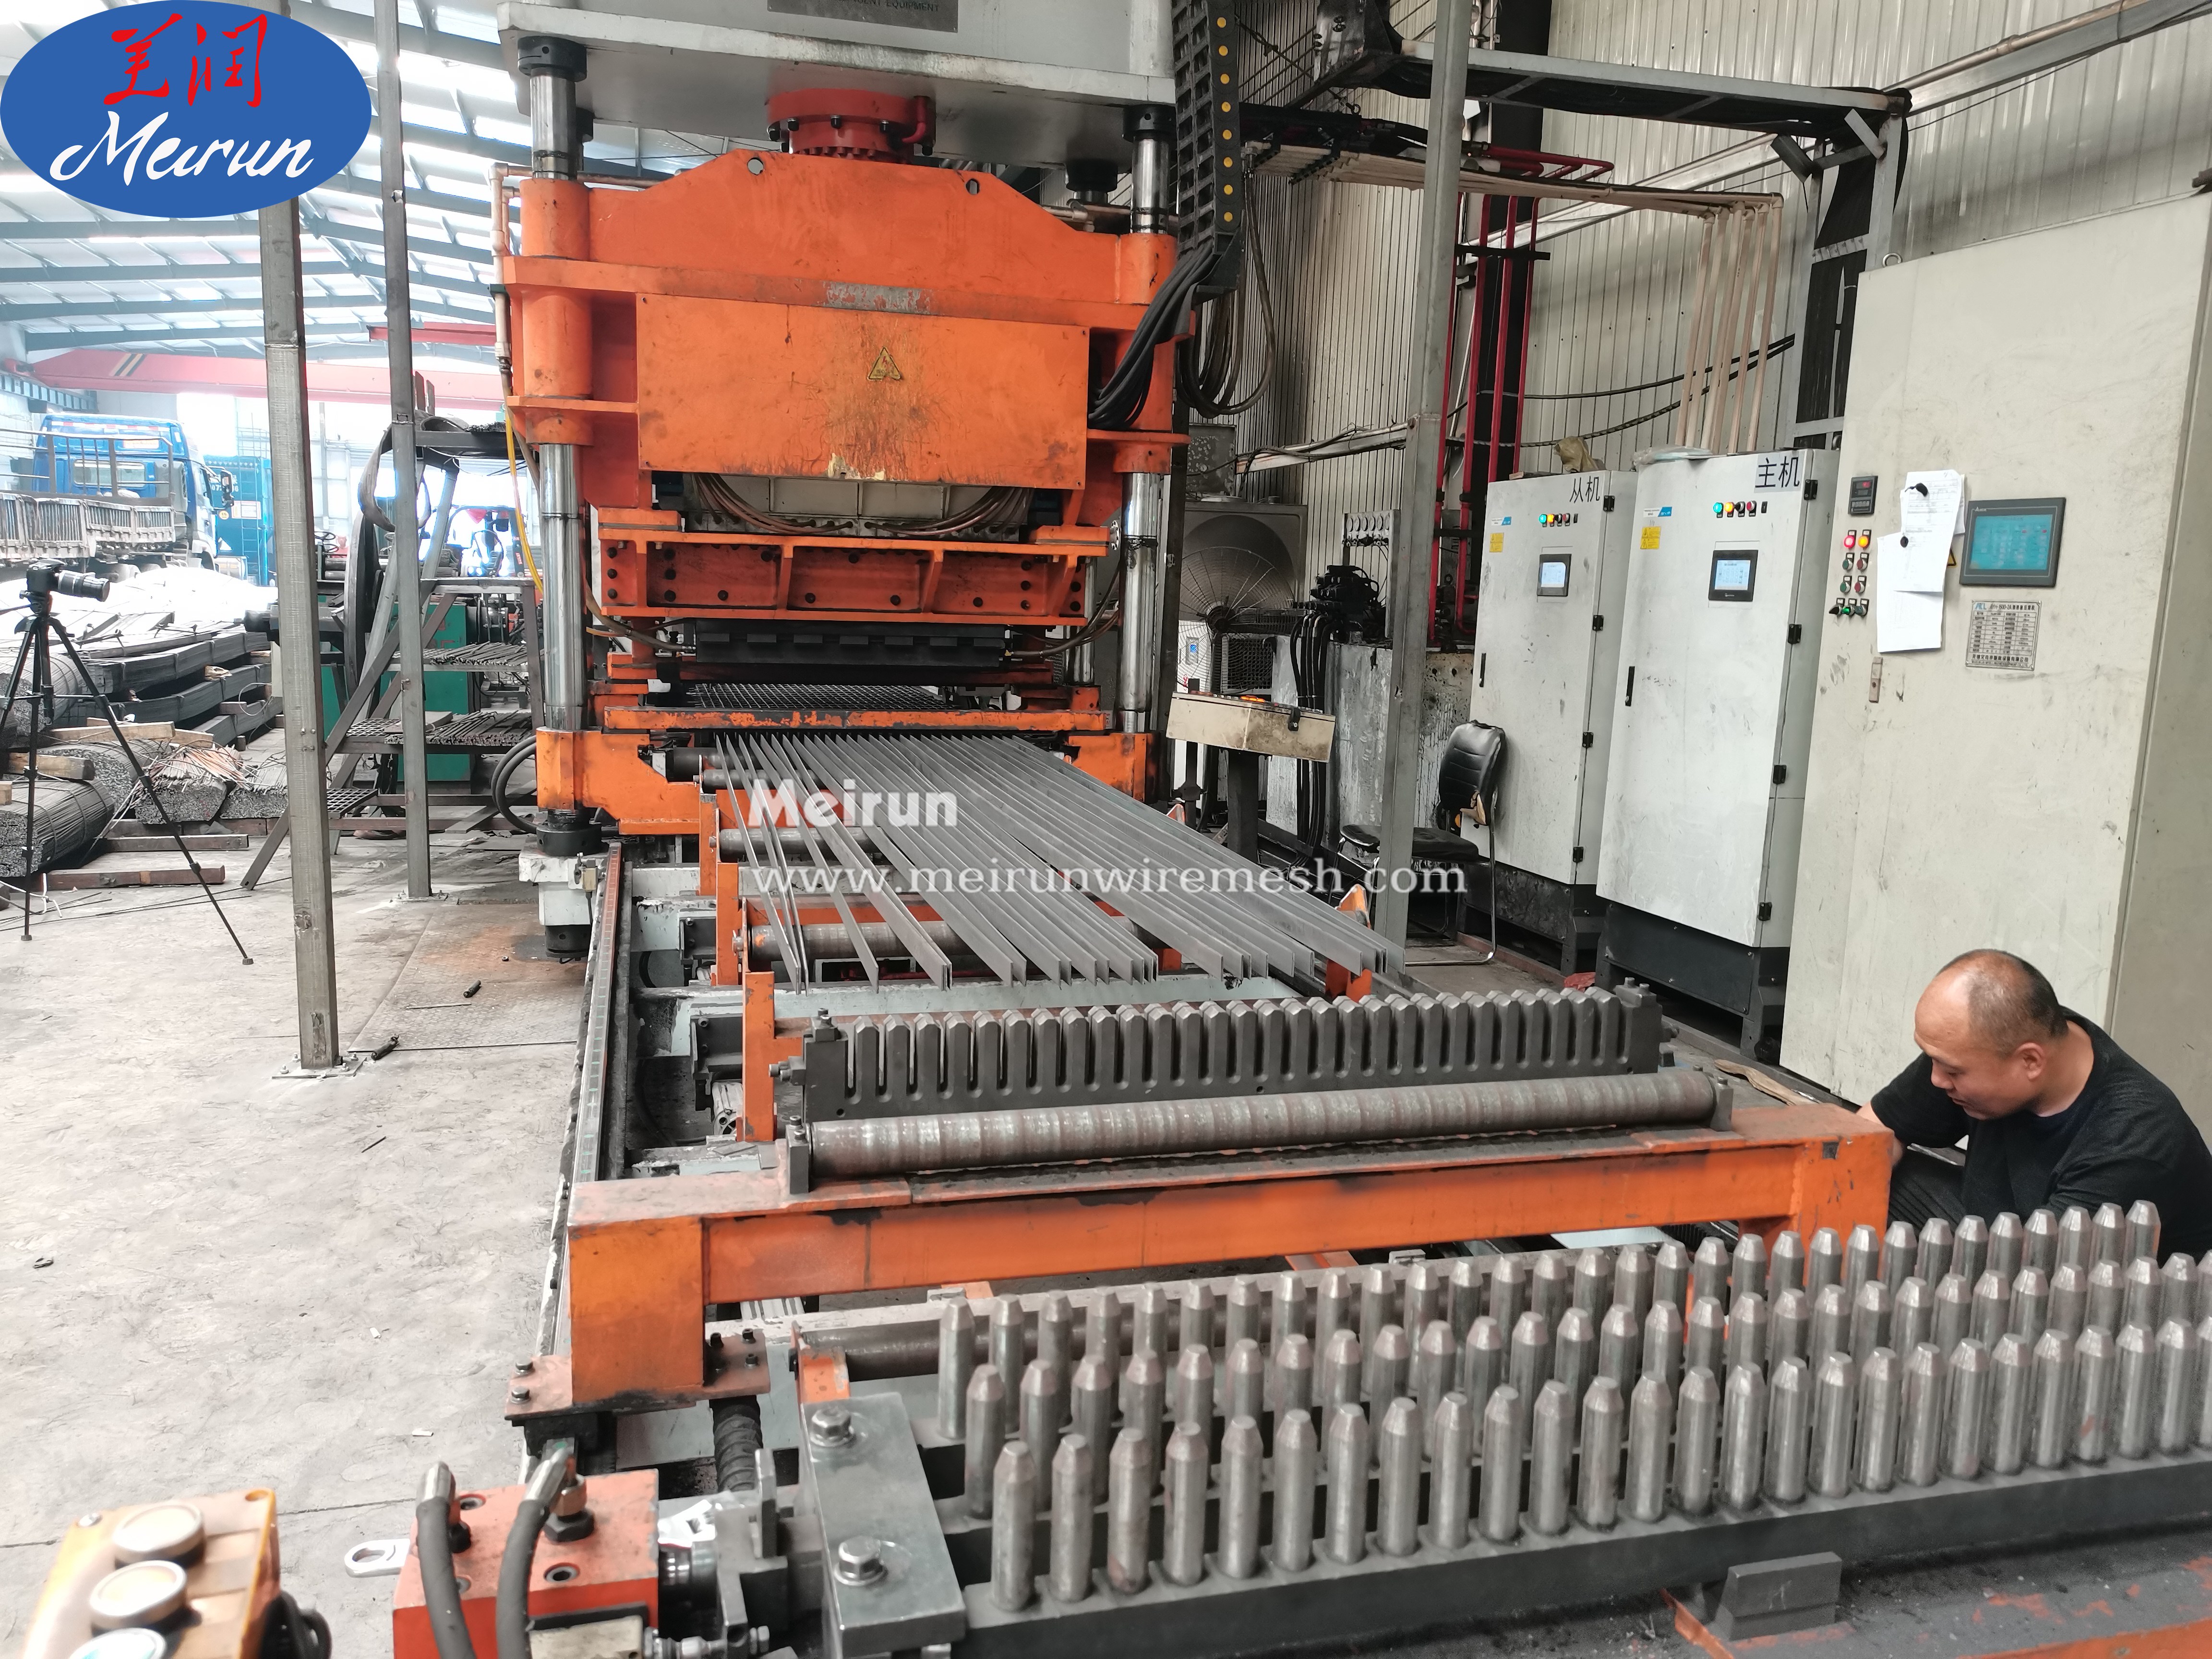 Steel Grating Electro Forged Welding Machine